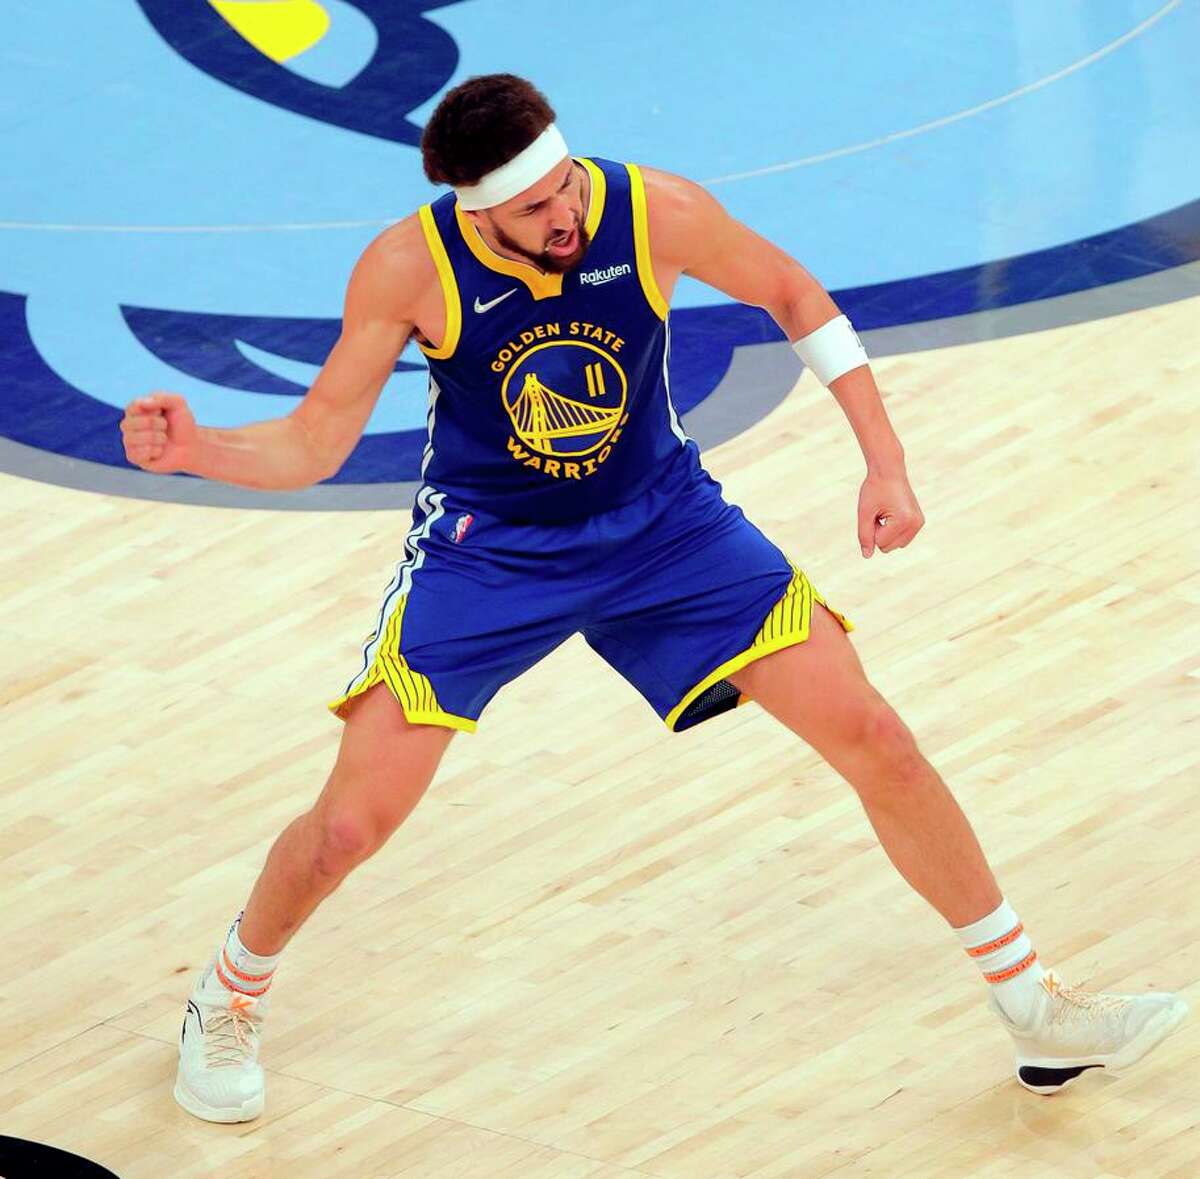 Klay Thompson (11) celebrates a three point shot made in the second half as the Golden State Warriors played the Memphis Grizzlies in Game 1 of the second round of the NBA Playoffs at Fedex Forum in Memphis, Tenn., on Sunday, May 1, 2022.